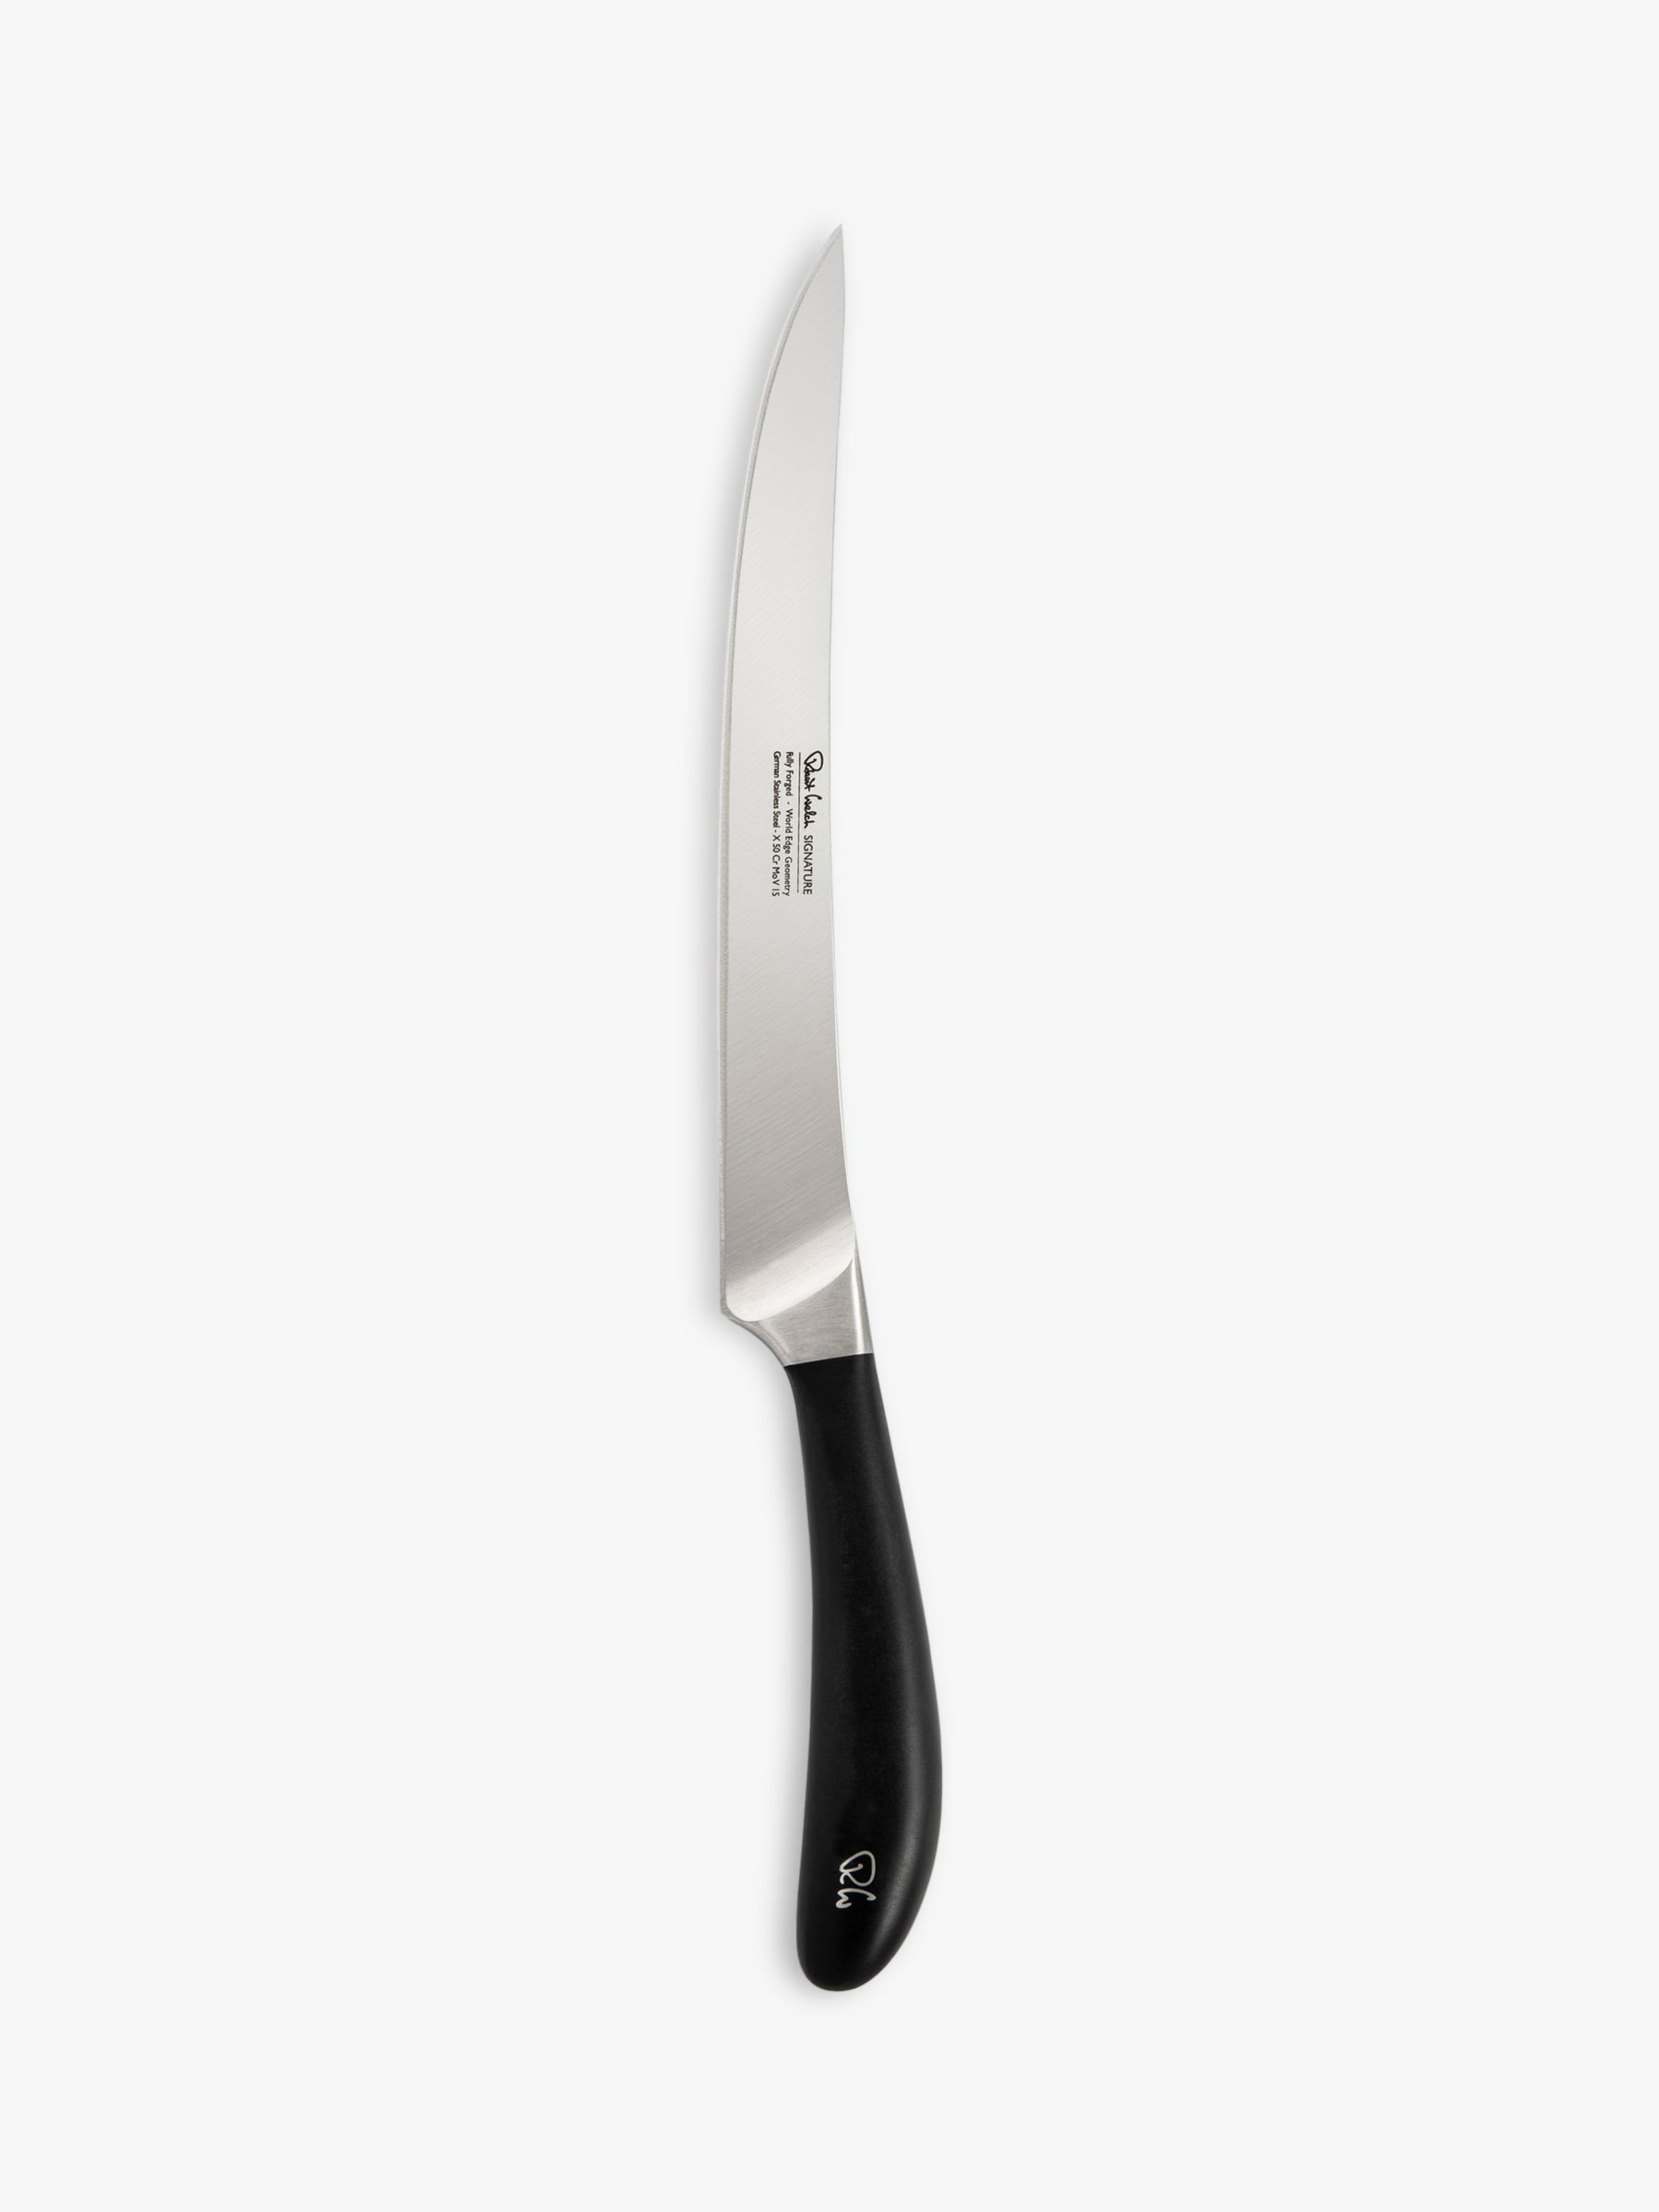 Robert Welch Signature Carving Knife, 23cm